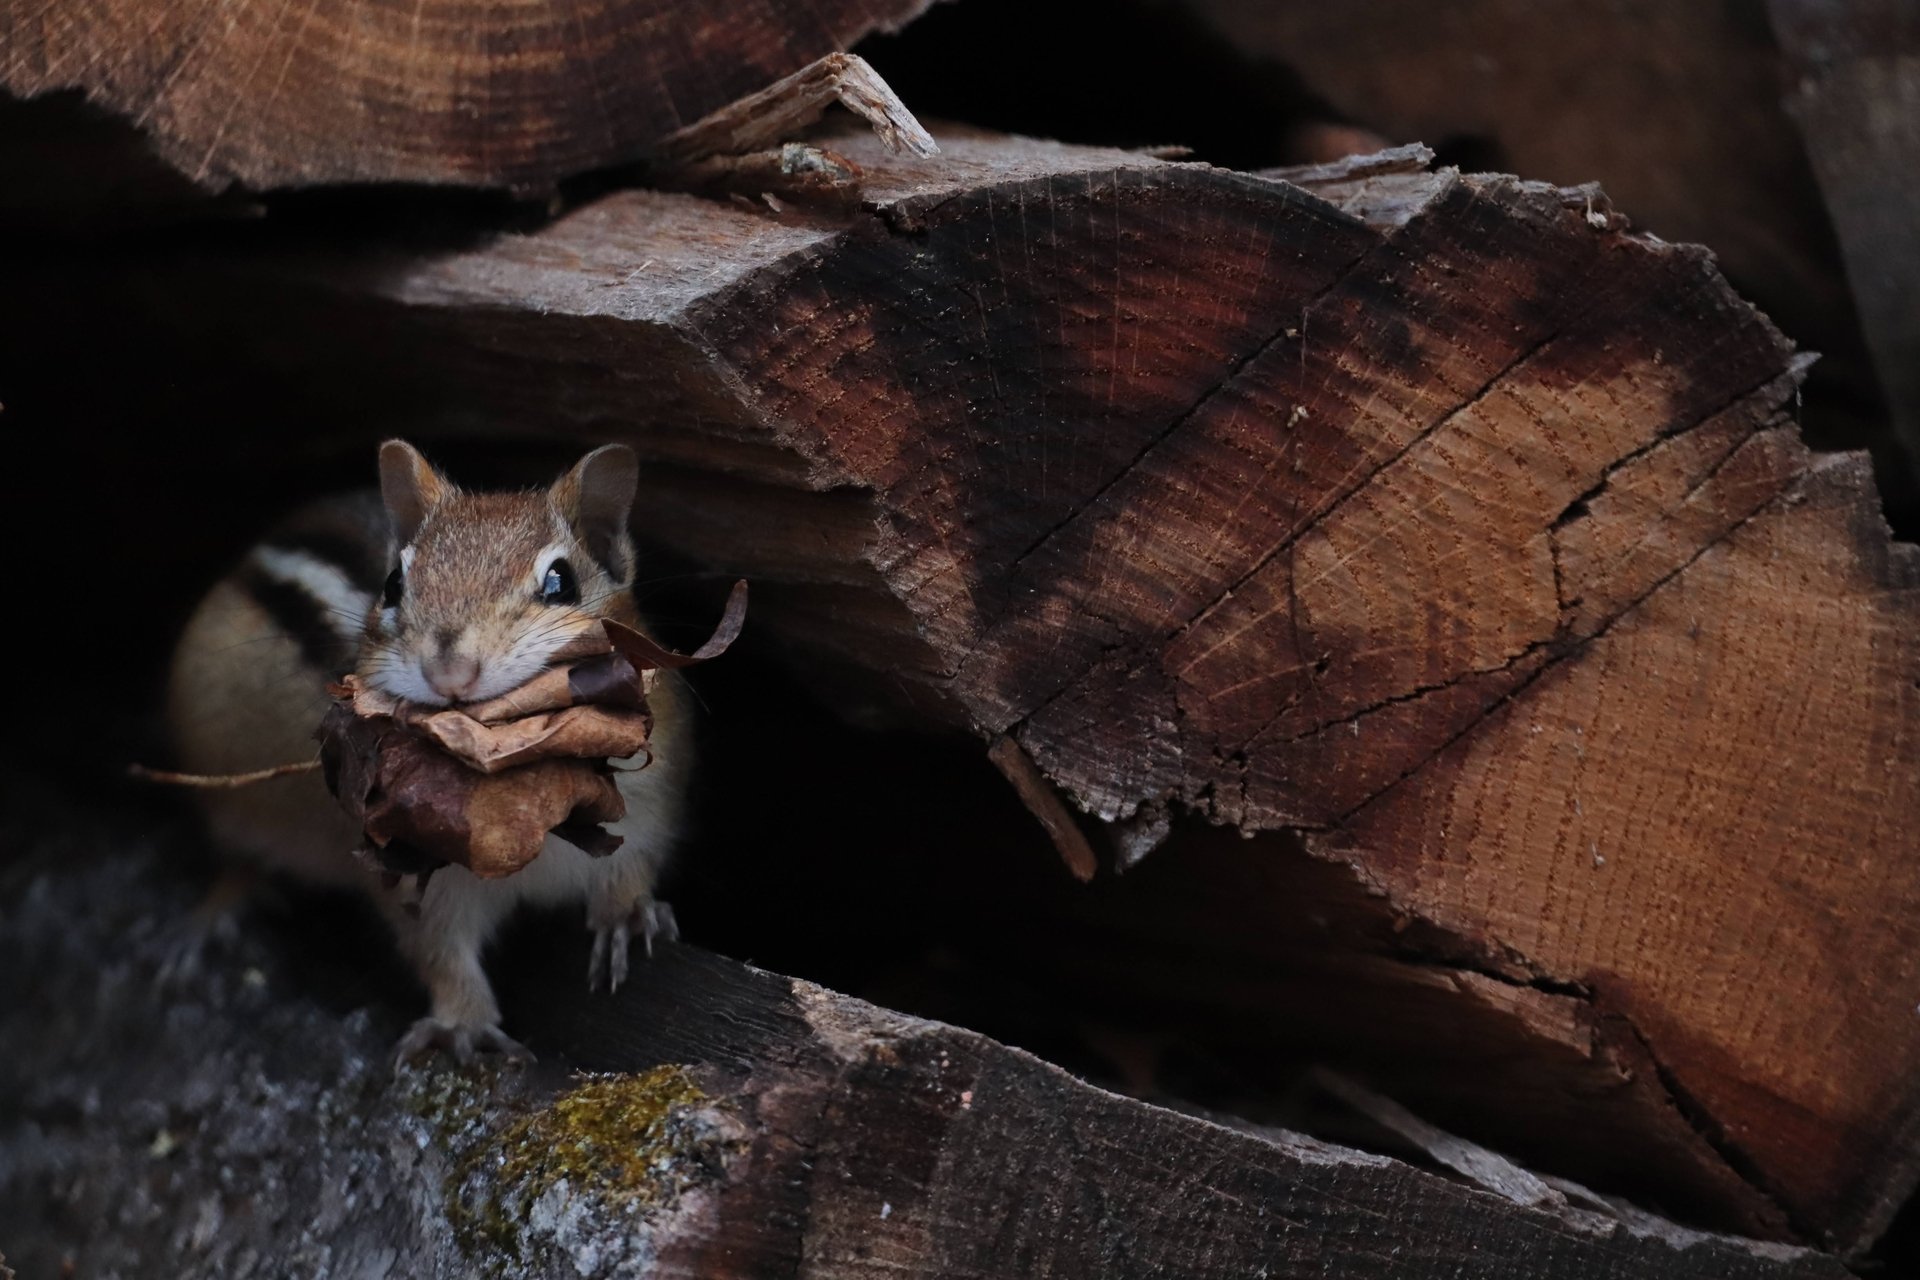 Chipmunk standing on a cut log with dead leaves in its mouth.